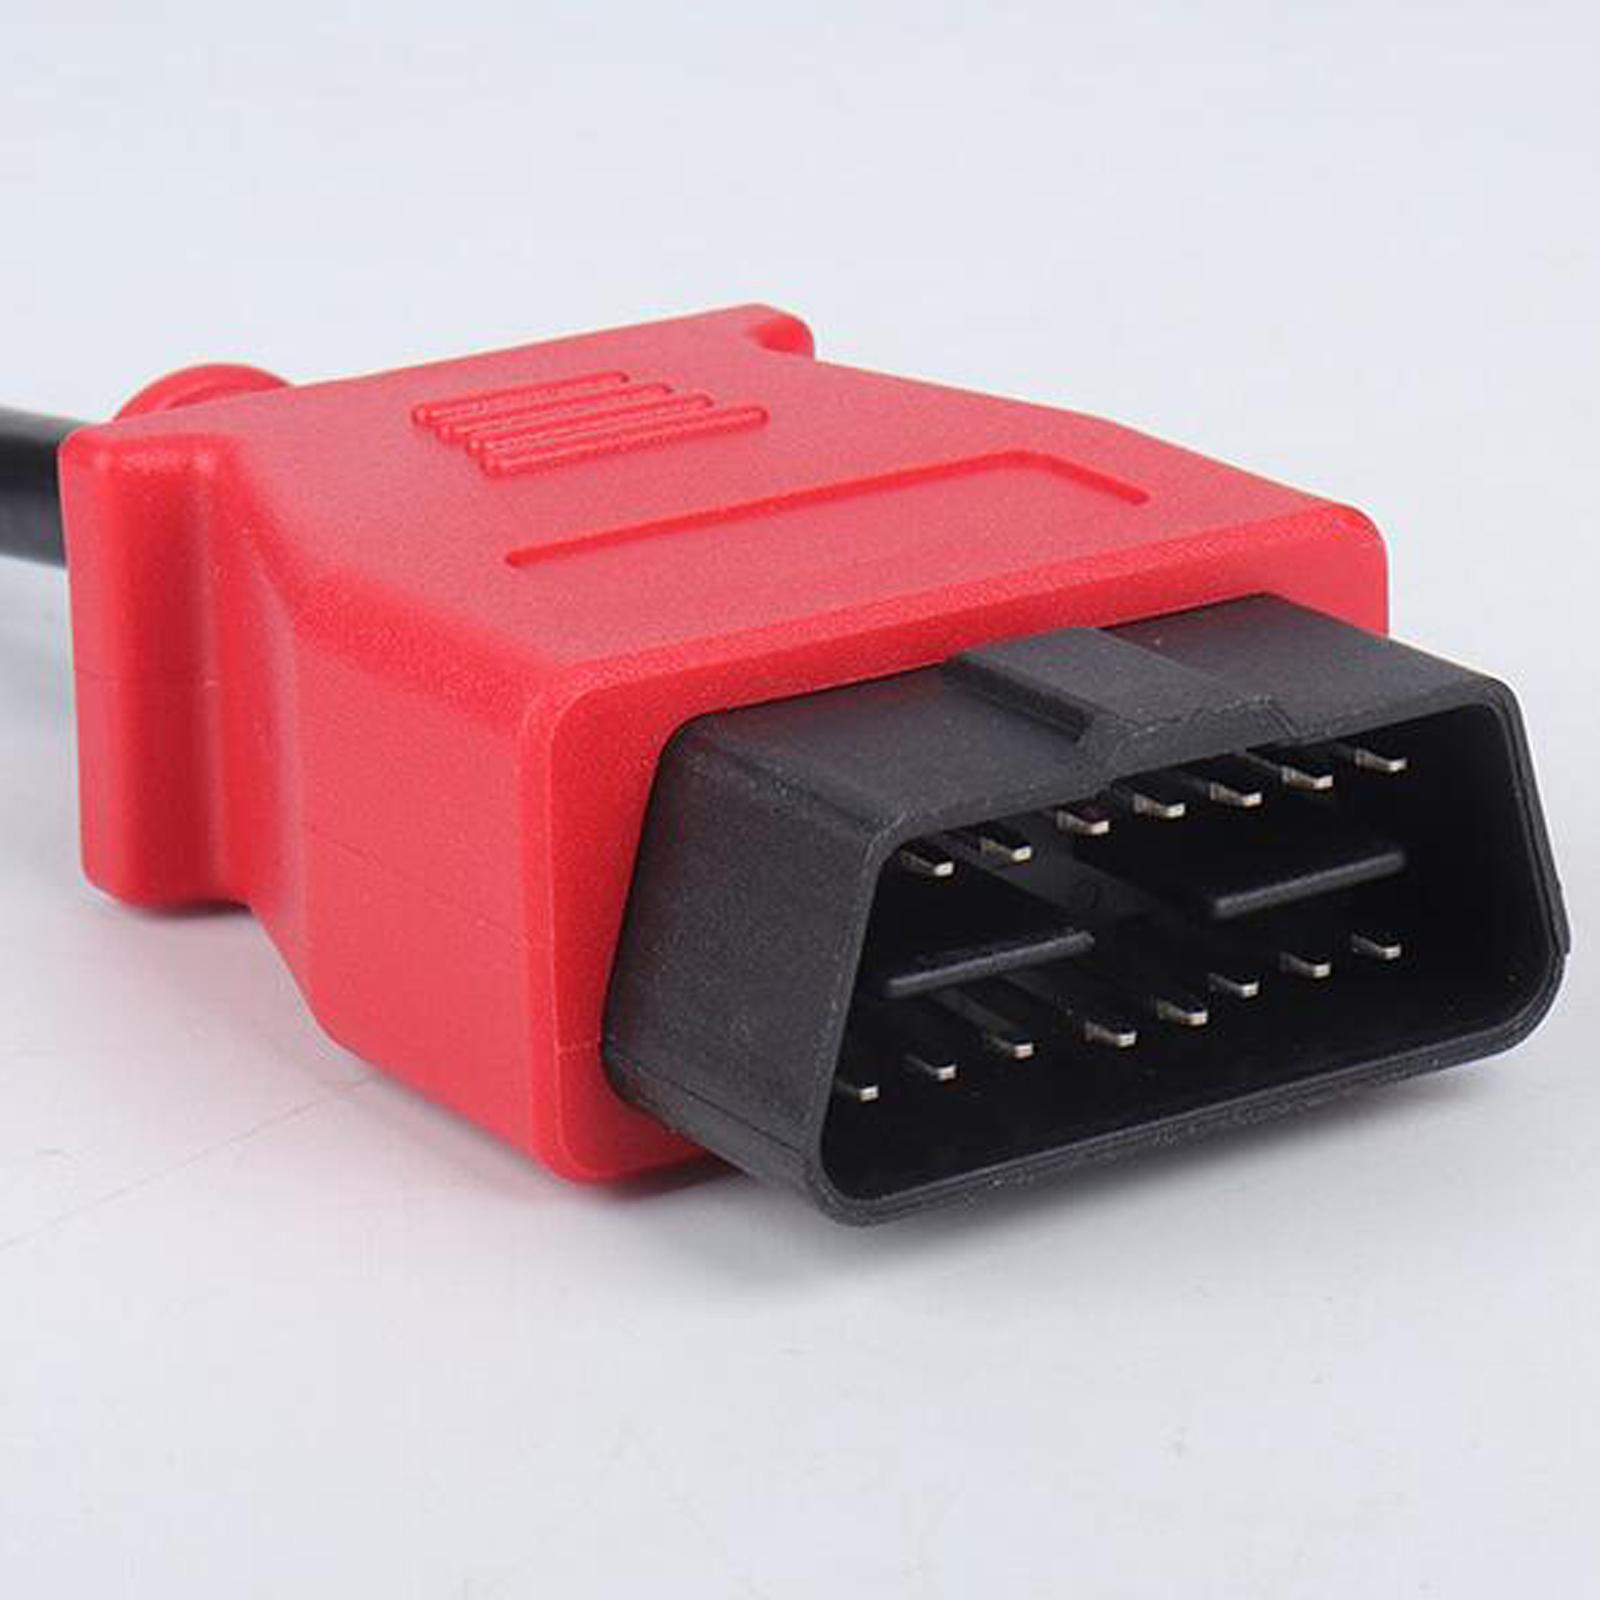 OBDII Main Test Cable 26 Pin scan Tool Fit for MS808 MS708